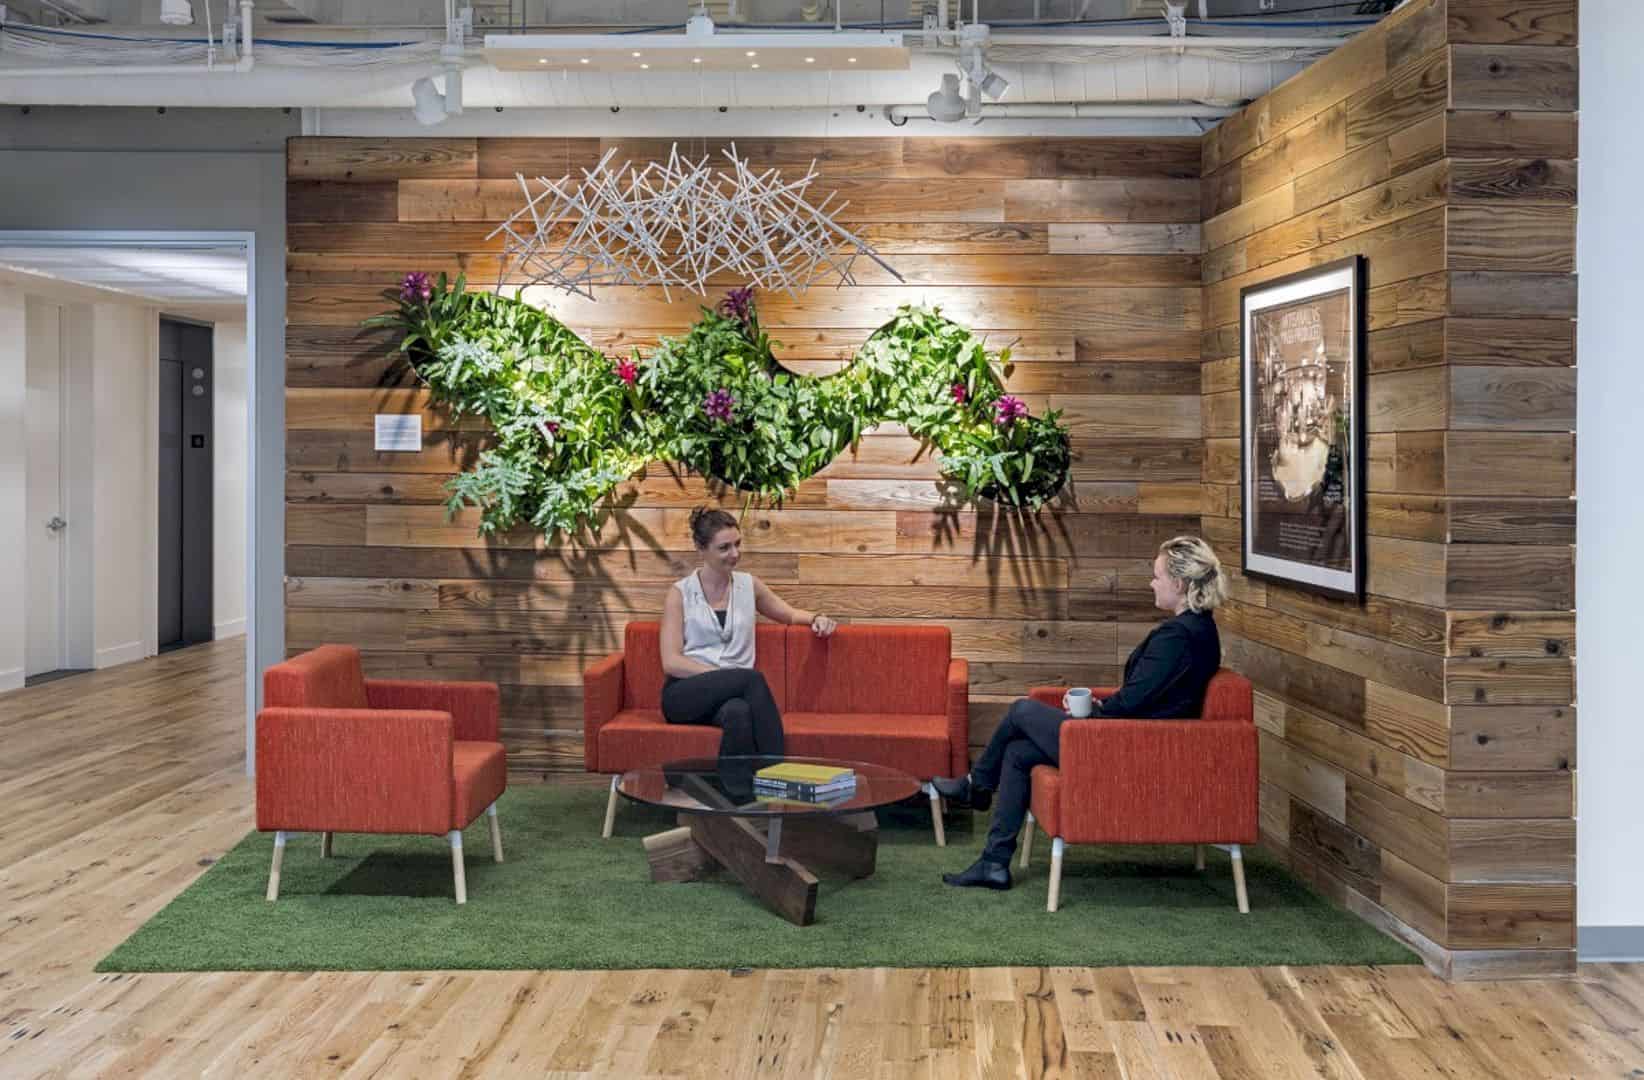 New Resource Bank Promotes Sustainability Through Leed Gold Office Design 1